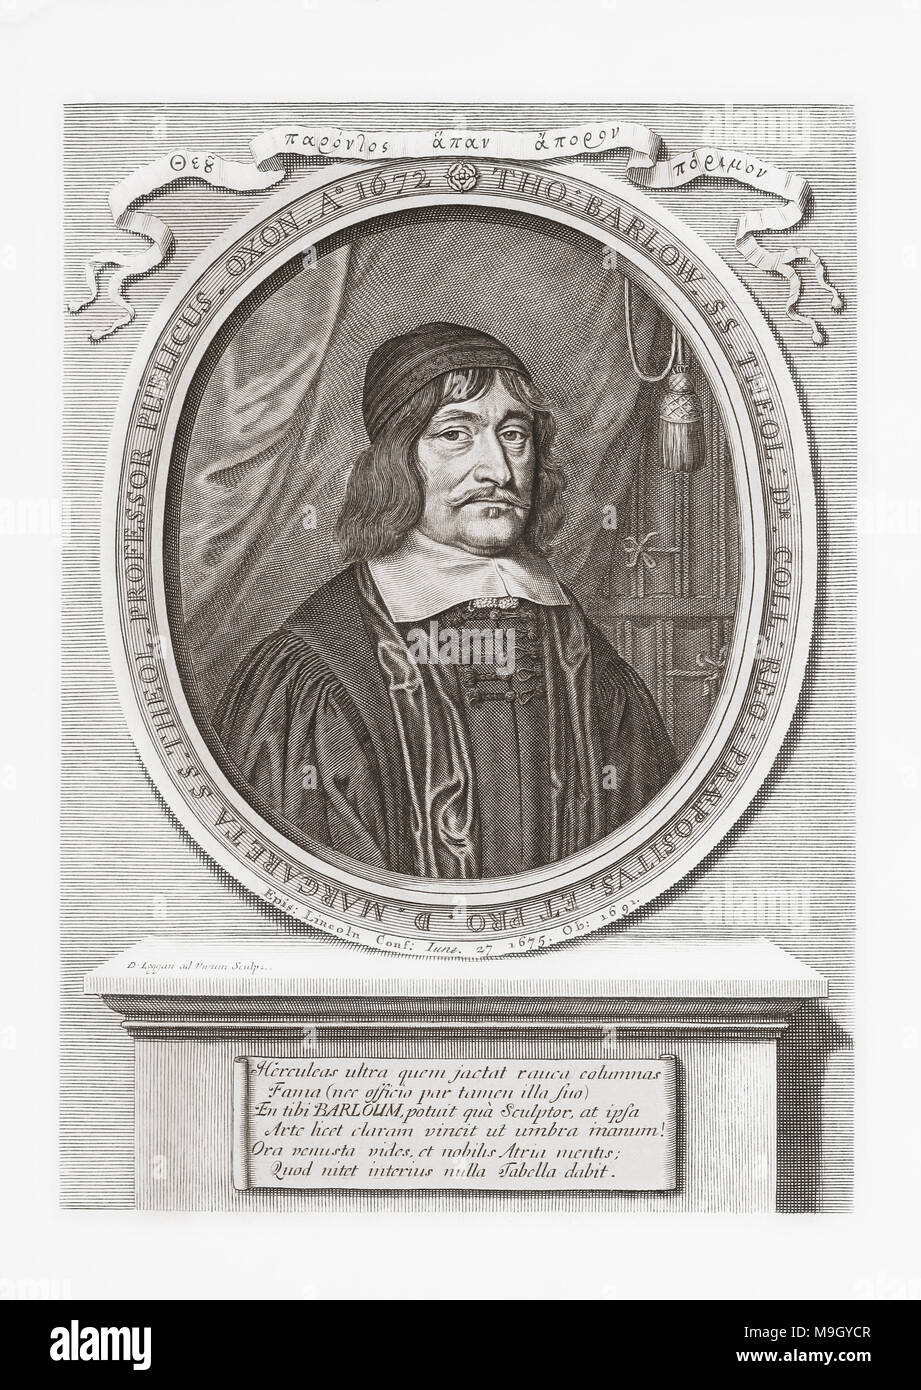 Thomas Barlow, 1608/9-1691. English academic and clergyman, Provost of The Queen's College, Oxford, Bishop of Lincoln.  From Woodburn’s Gallery of Rare Portraits, published 1816. Stock Photo